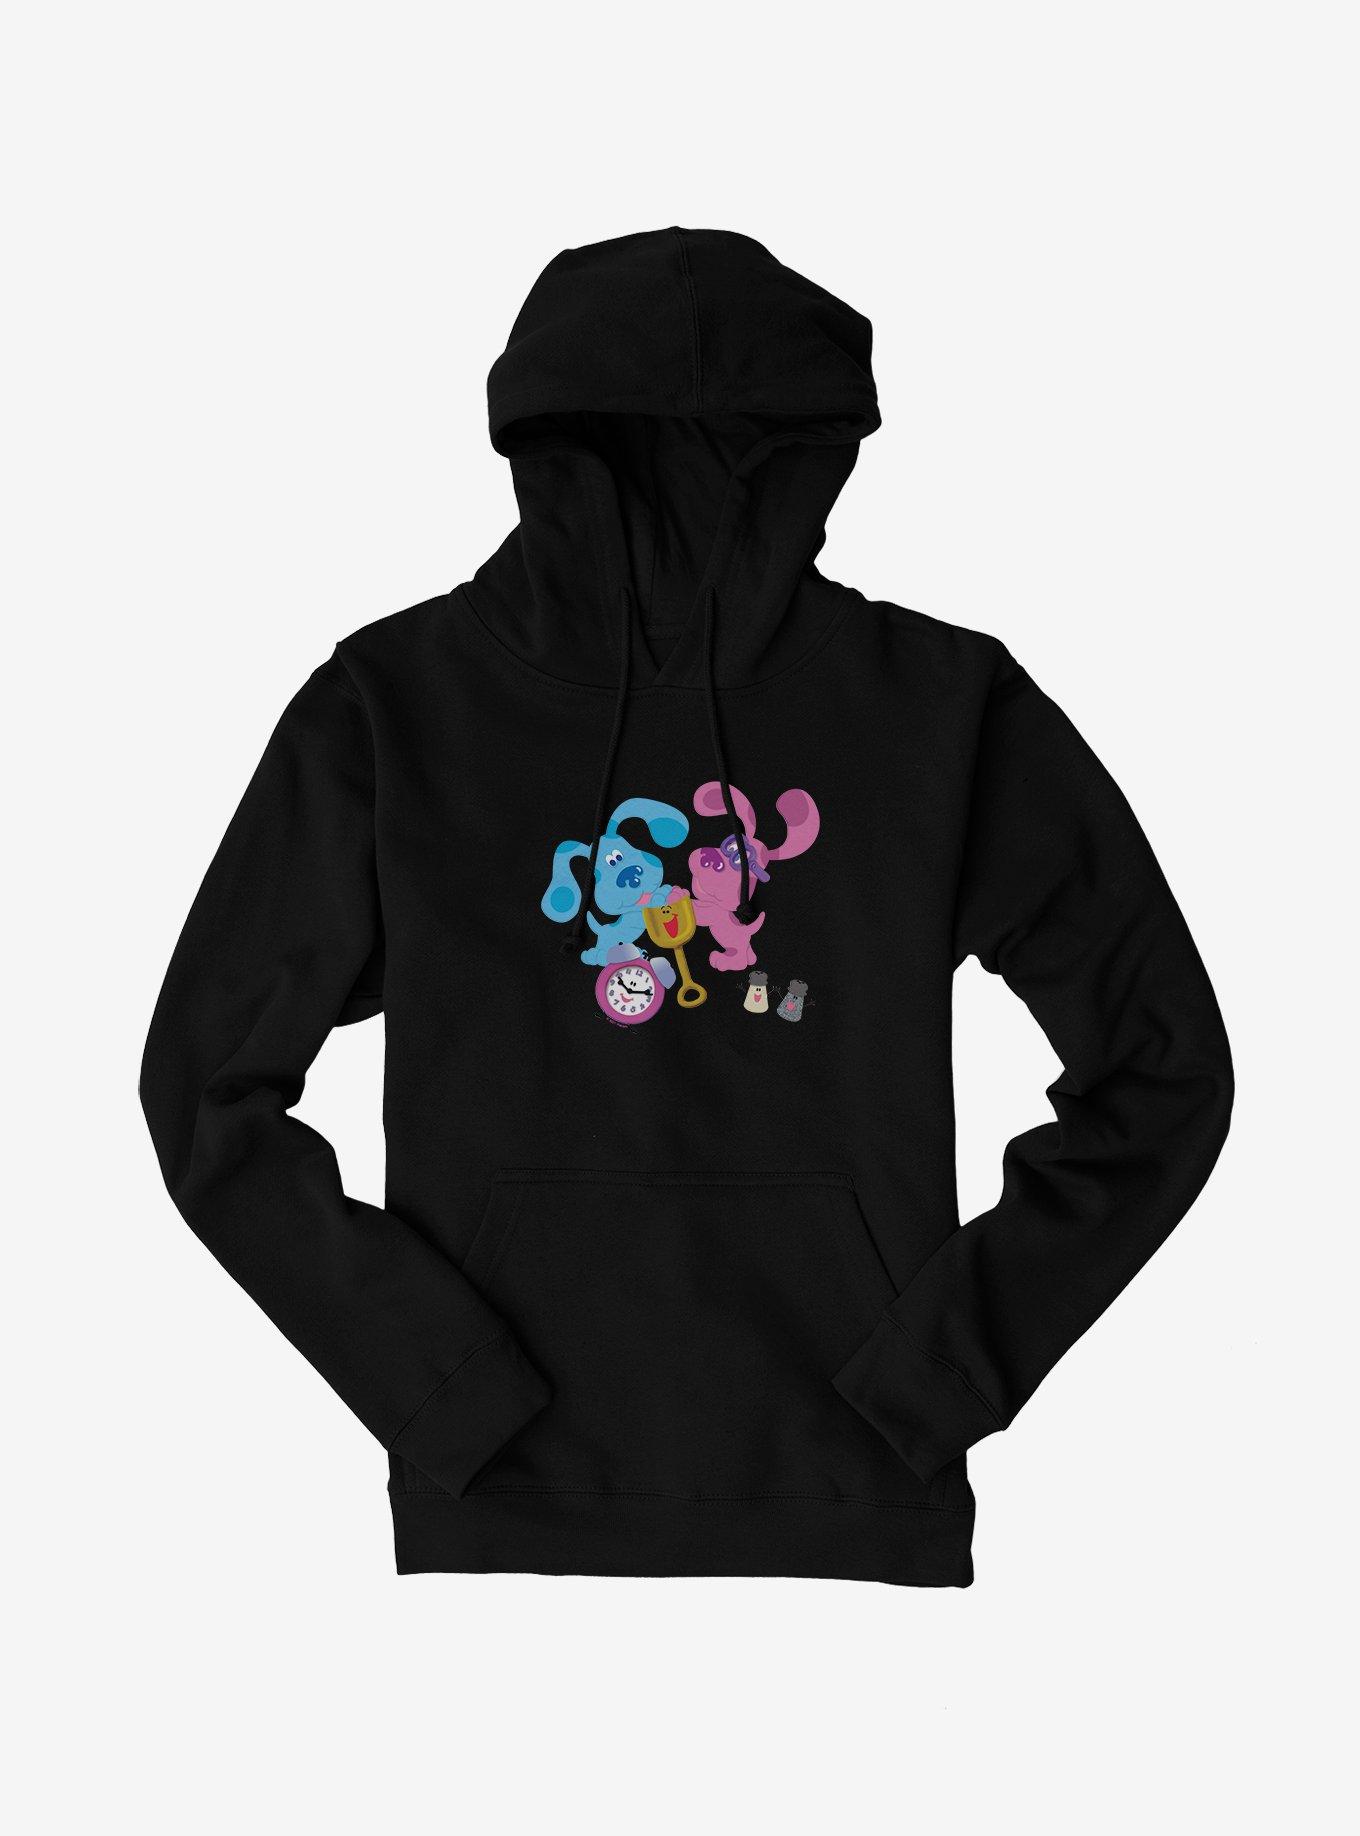 Blue's Clues Playful Group Hoodie